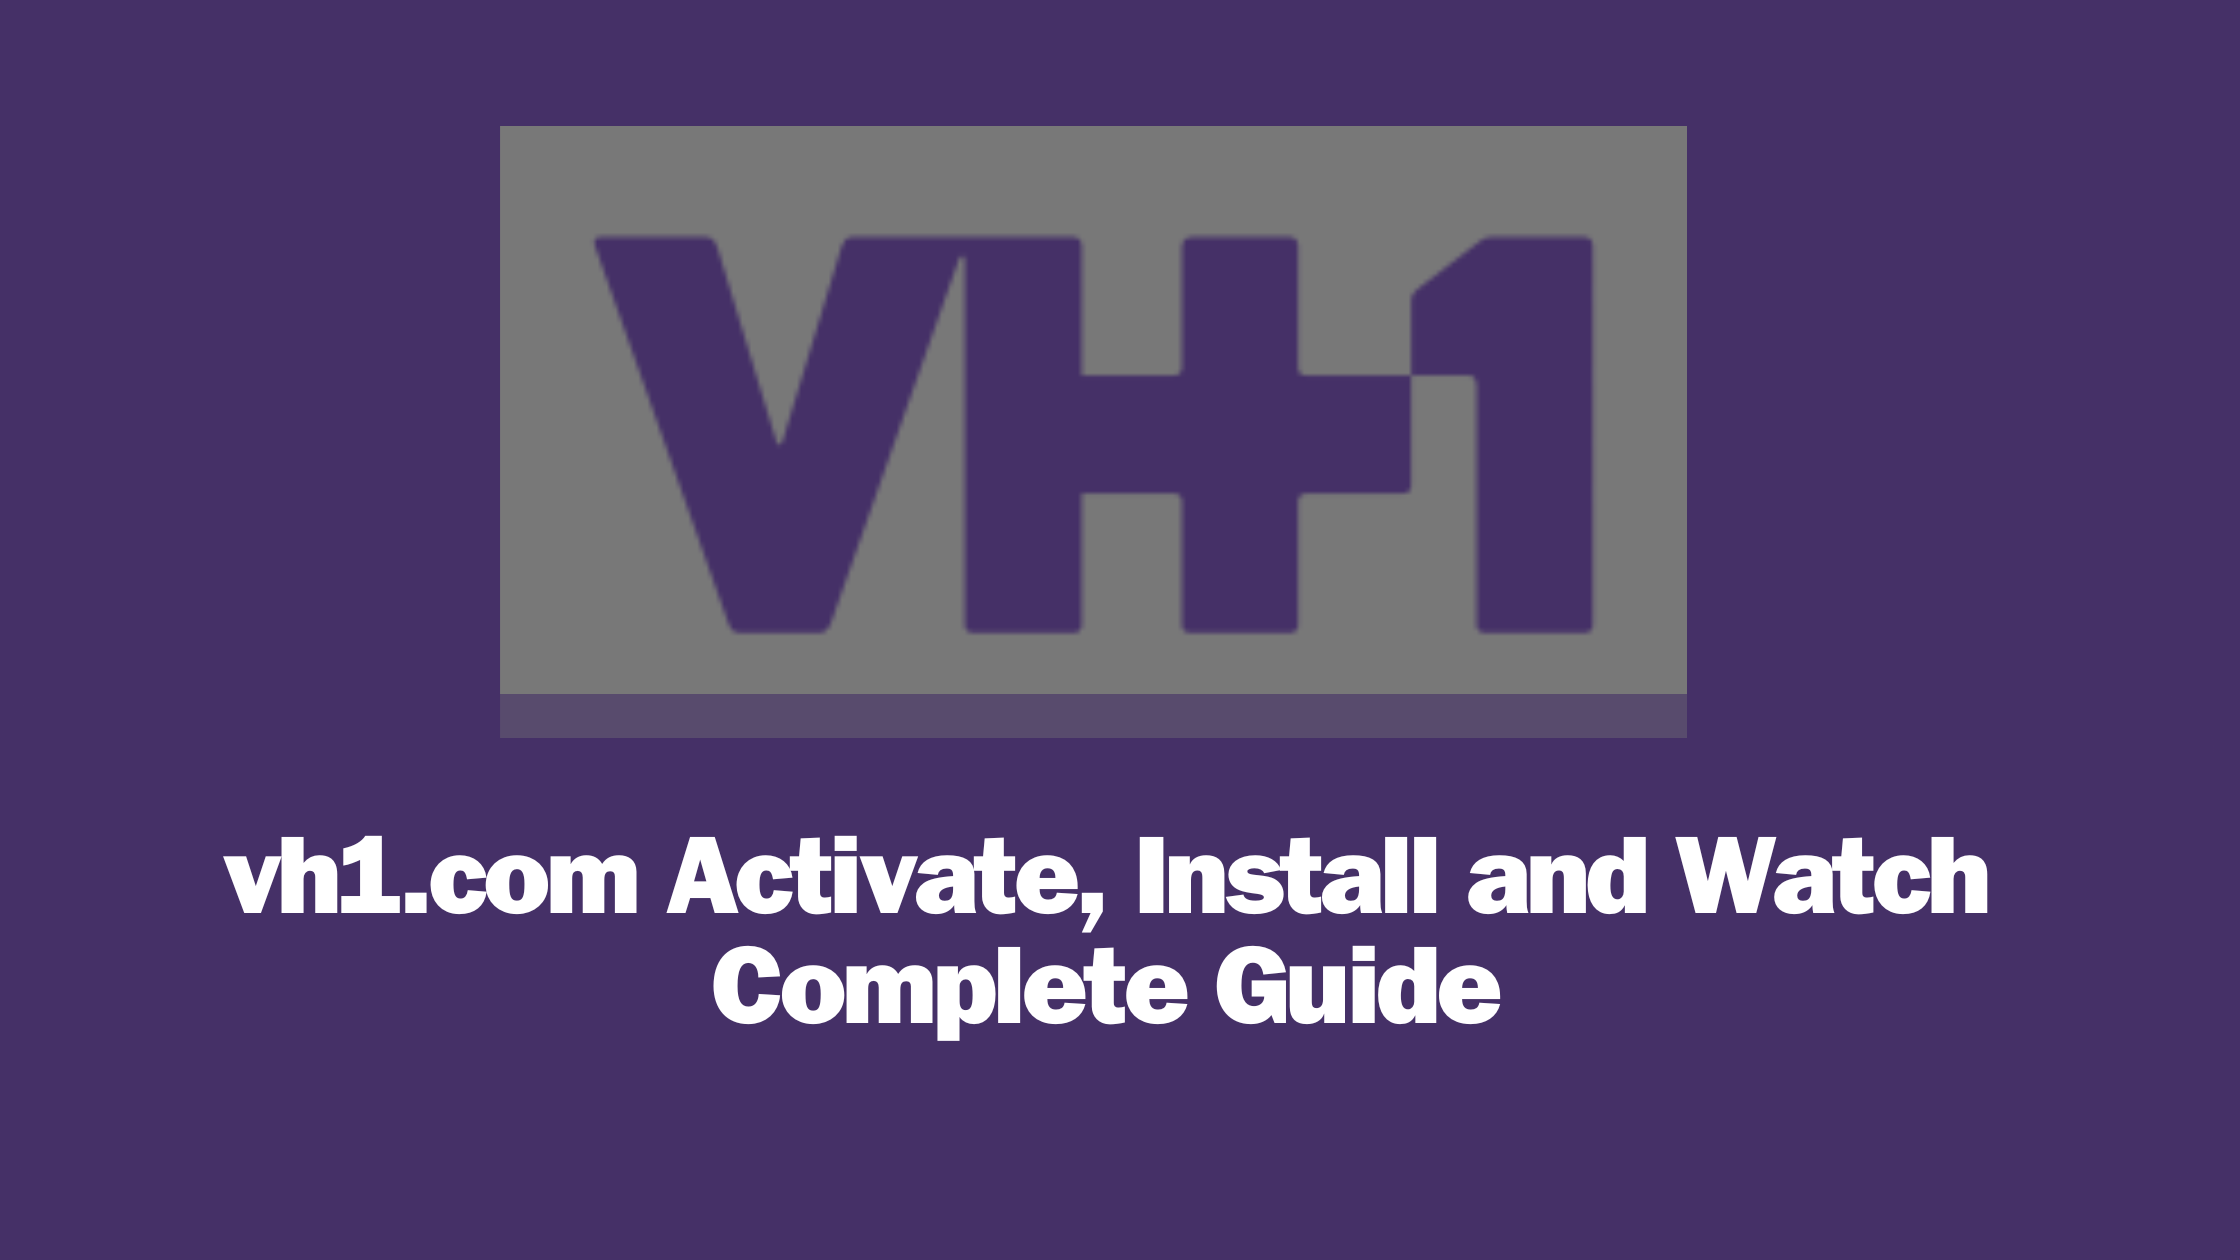 vh1 Complete Guide